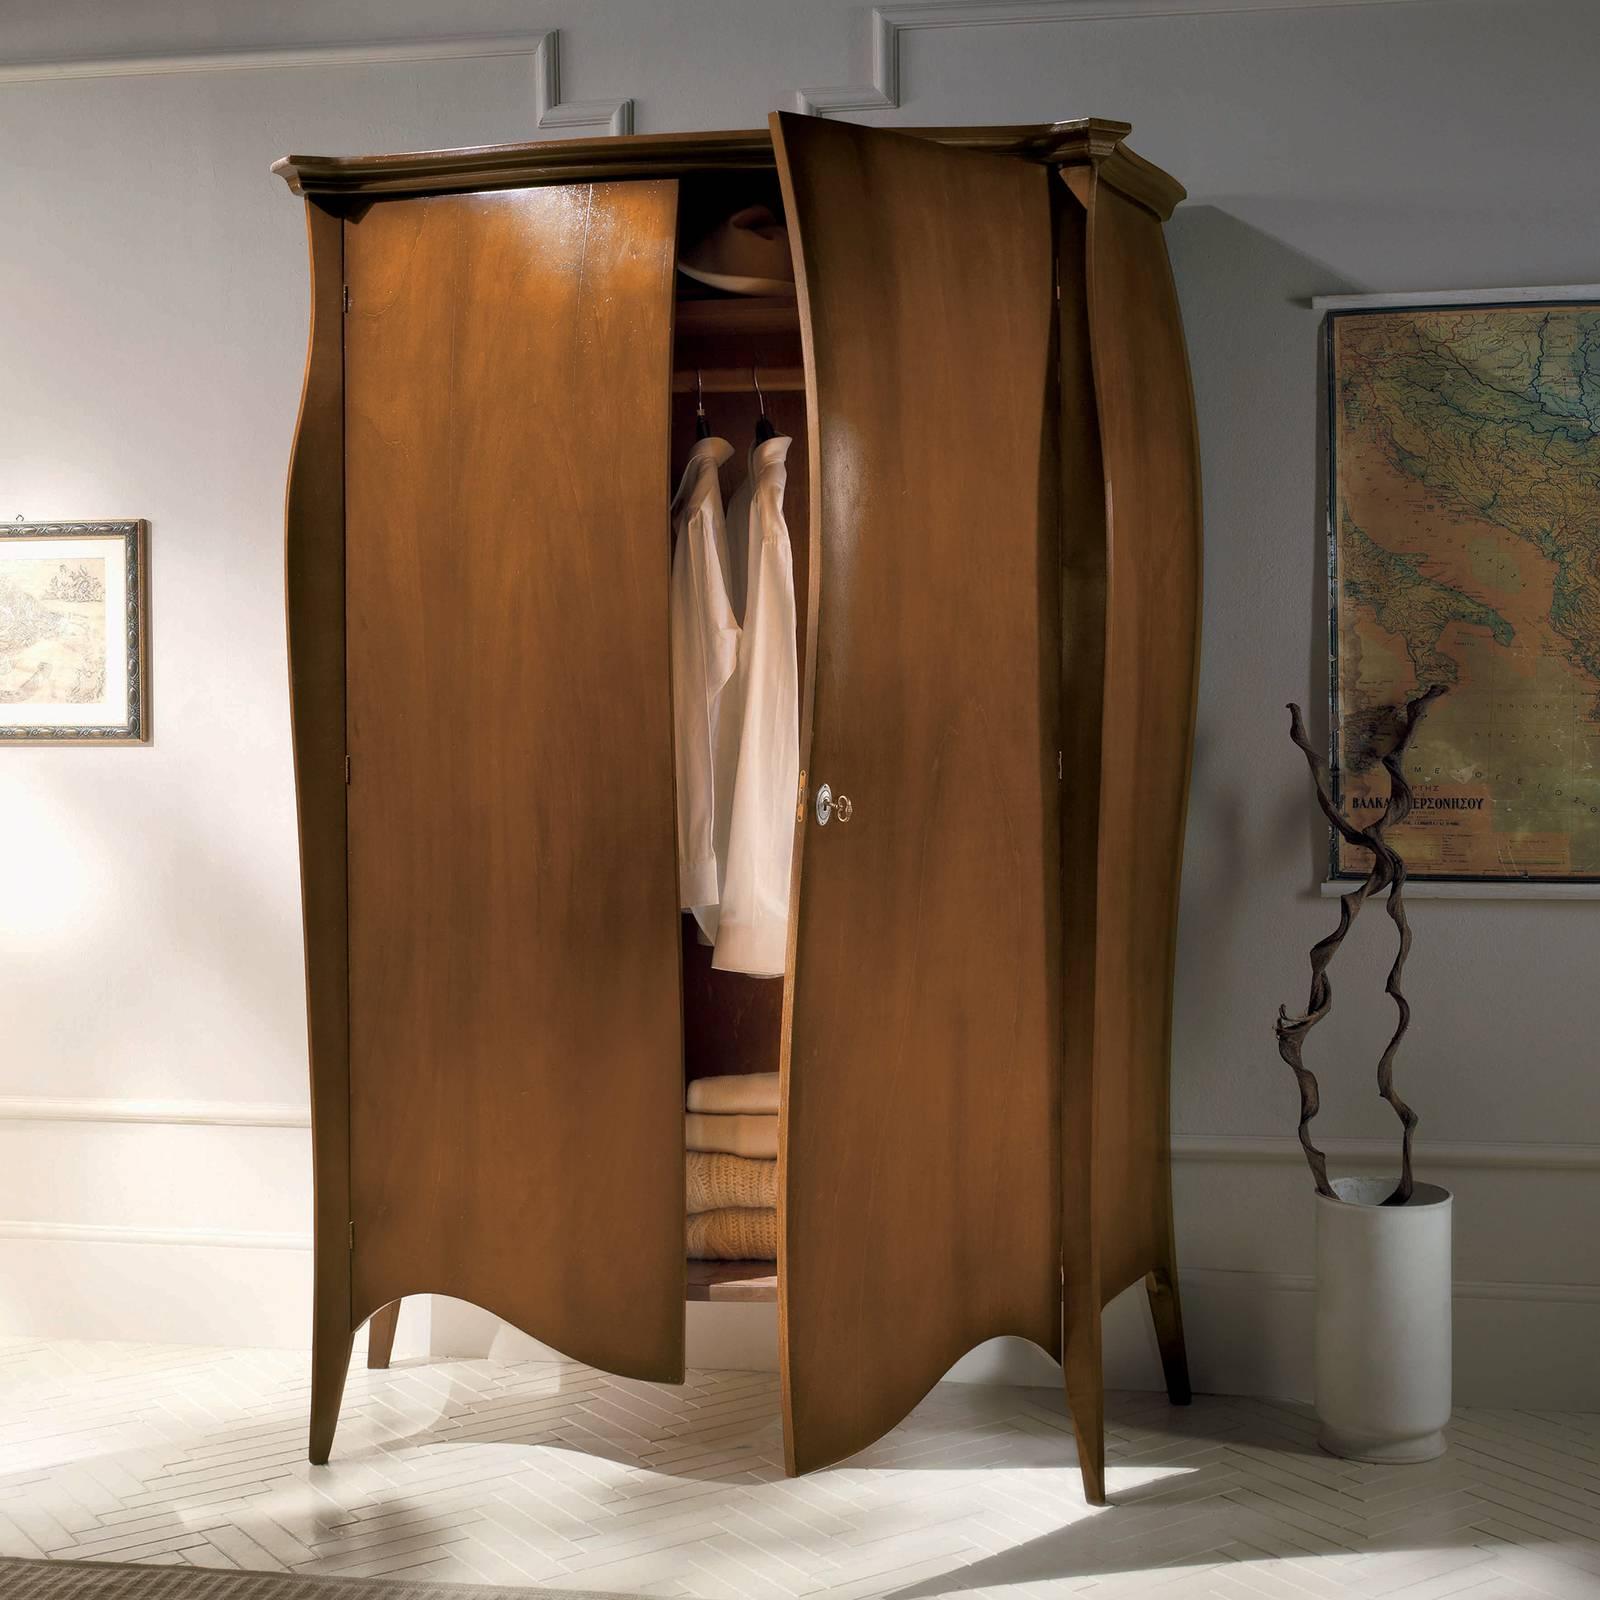 Stately and versatile, this wardrobe is a striking addition to a master bedroom decor. The voluminous, three-dimensional structure is characterized by a sinuous facade, scalloped lower edge, and delicate trim accents. Flanking the two front sides of